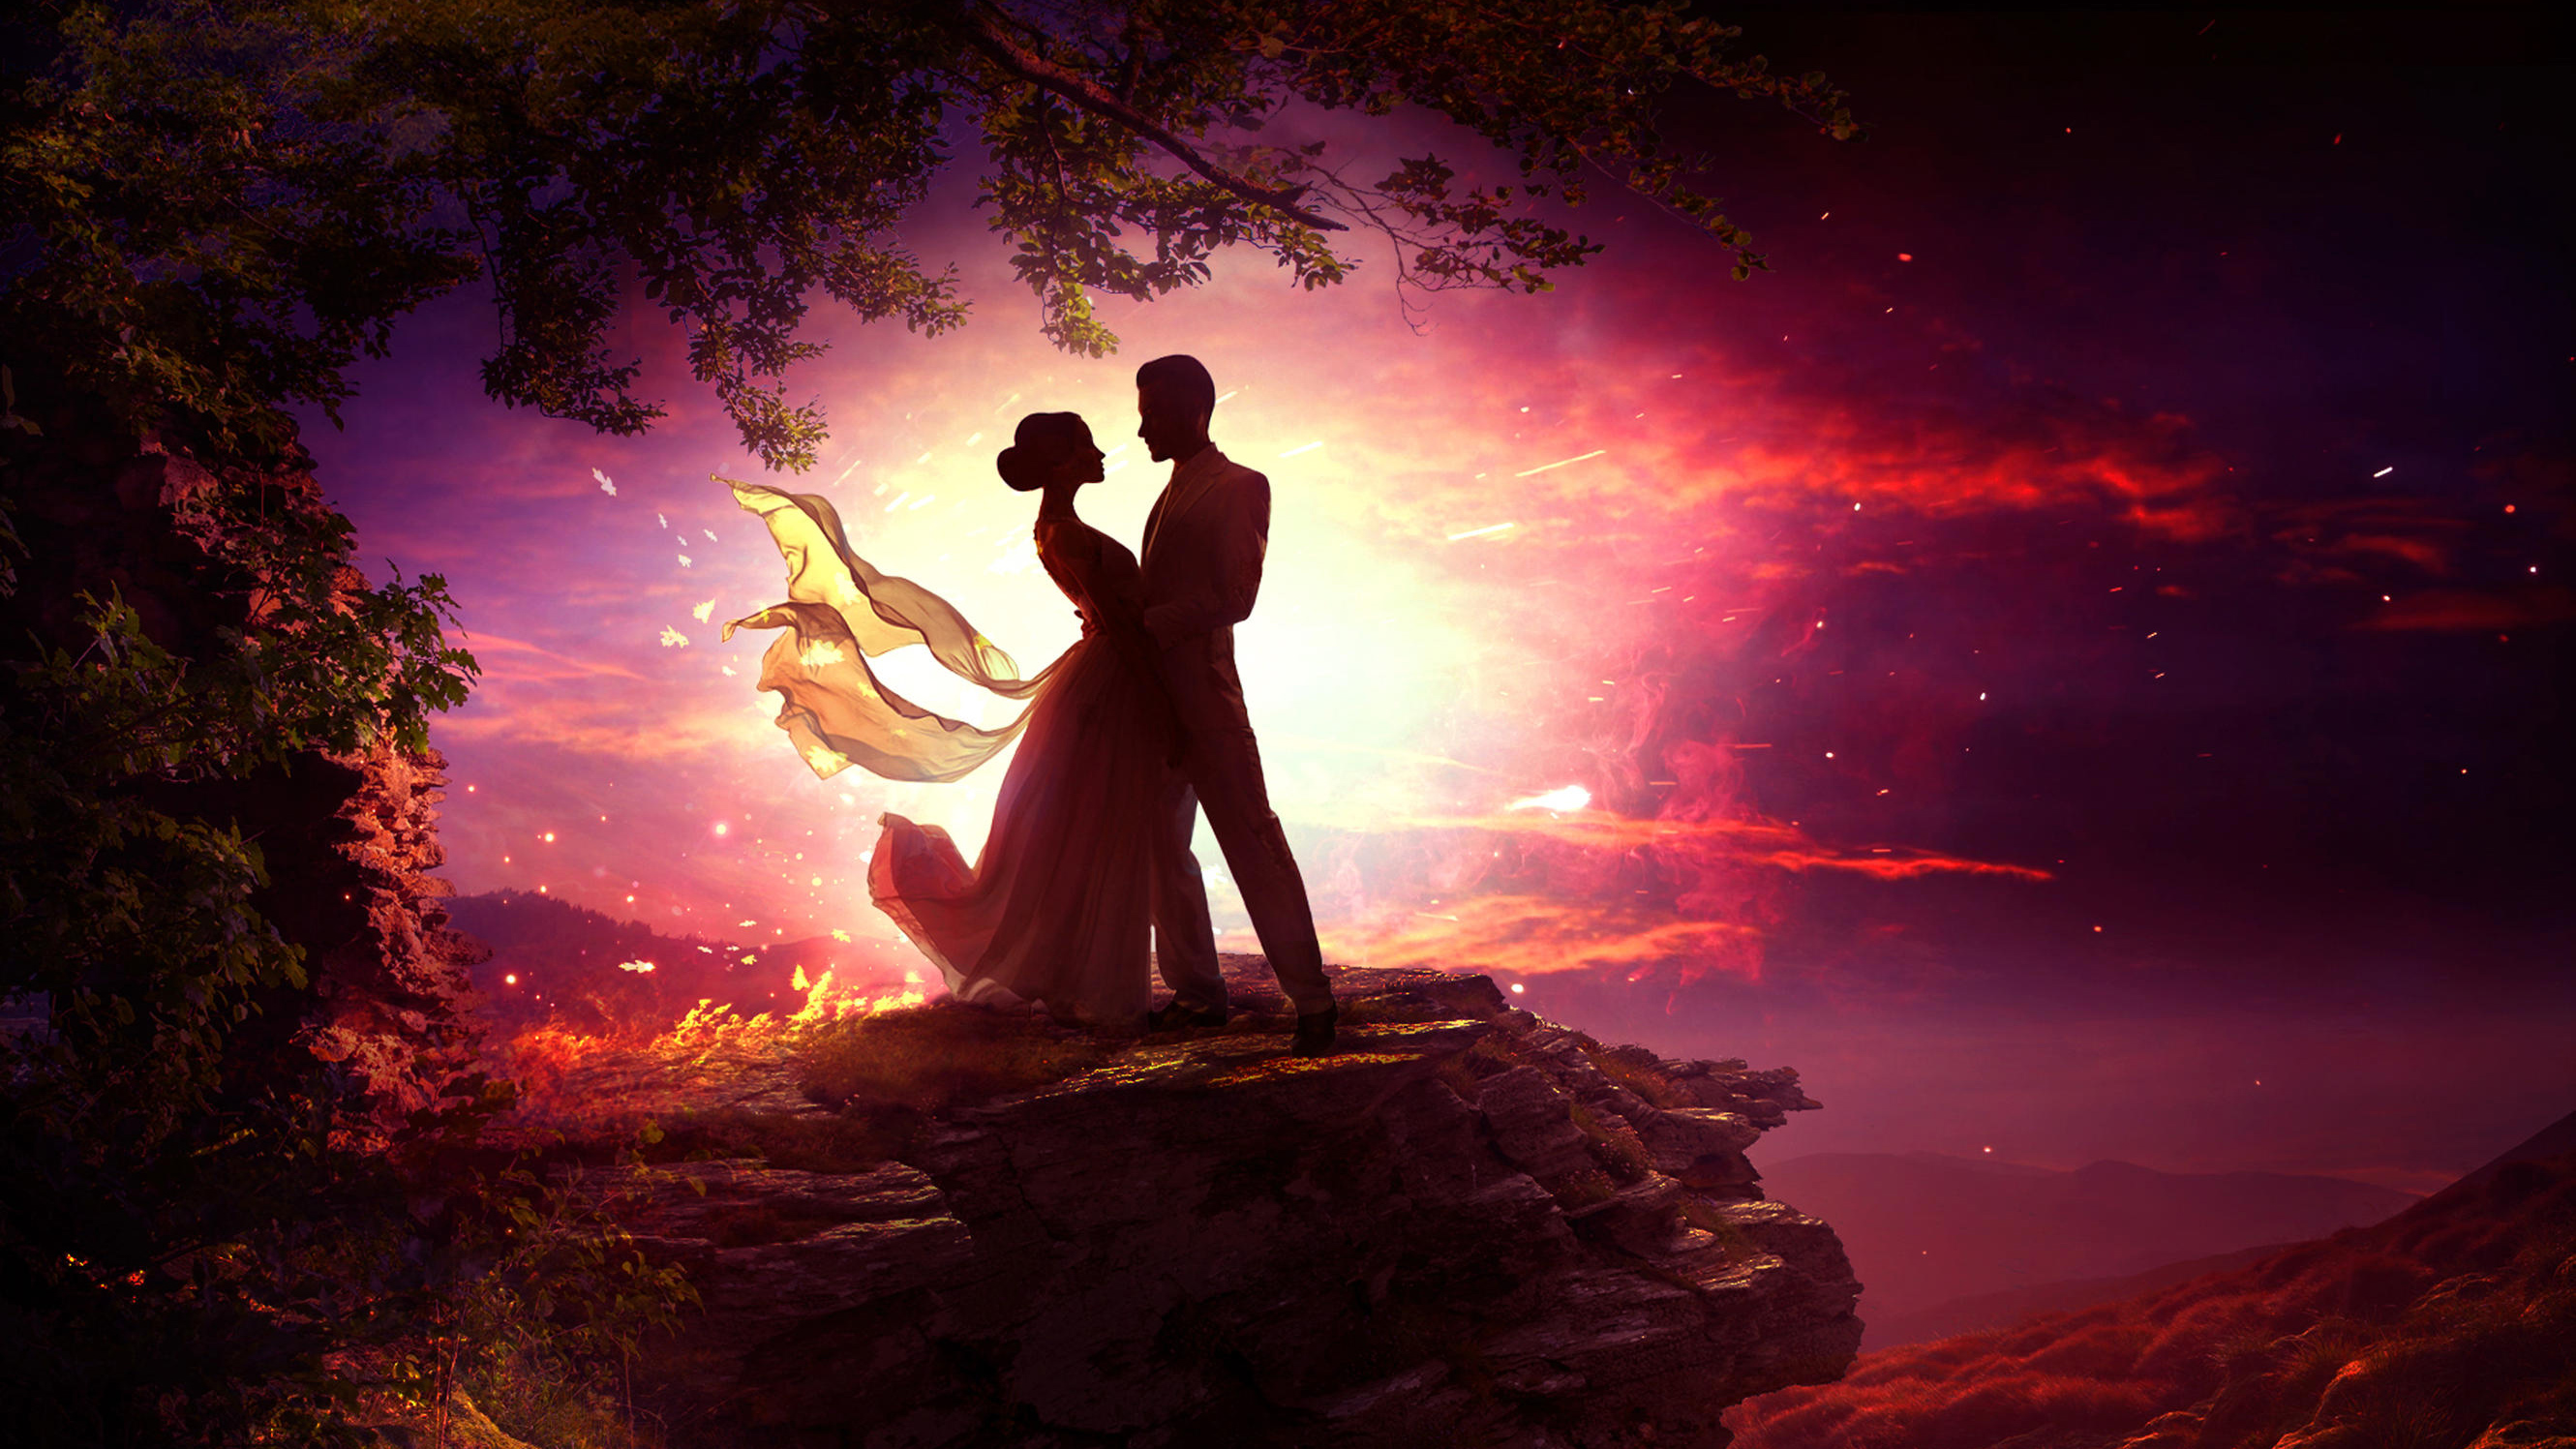 Dancing Couple In Moonlight Hd Love 4k Wallpapers Images Backgrounds Photos And Pictures